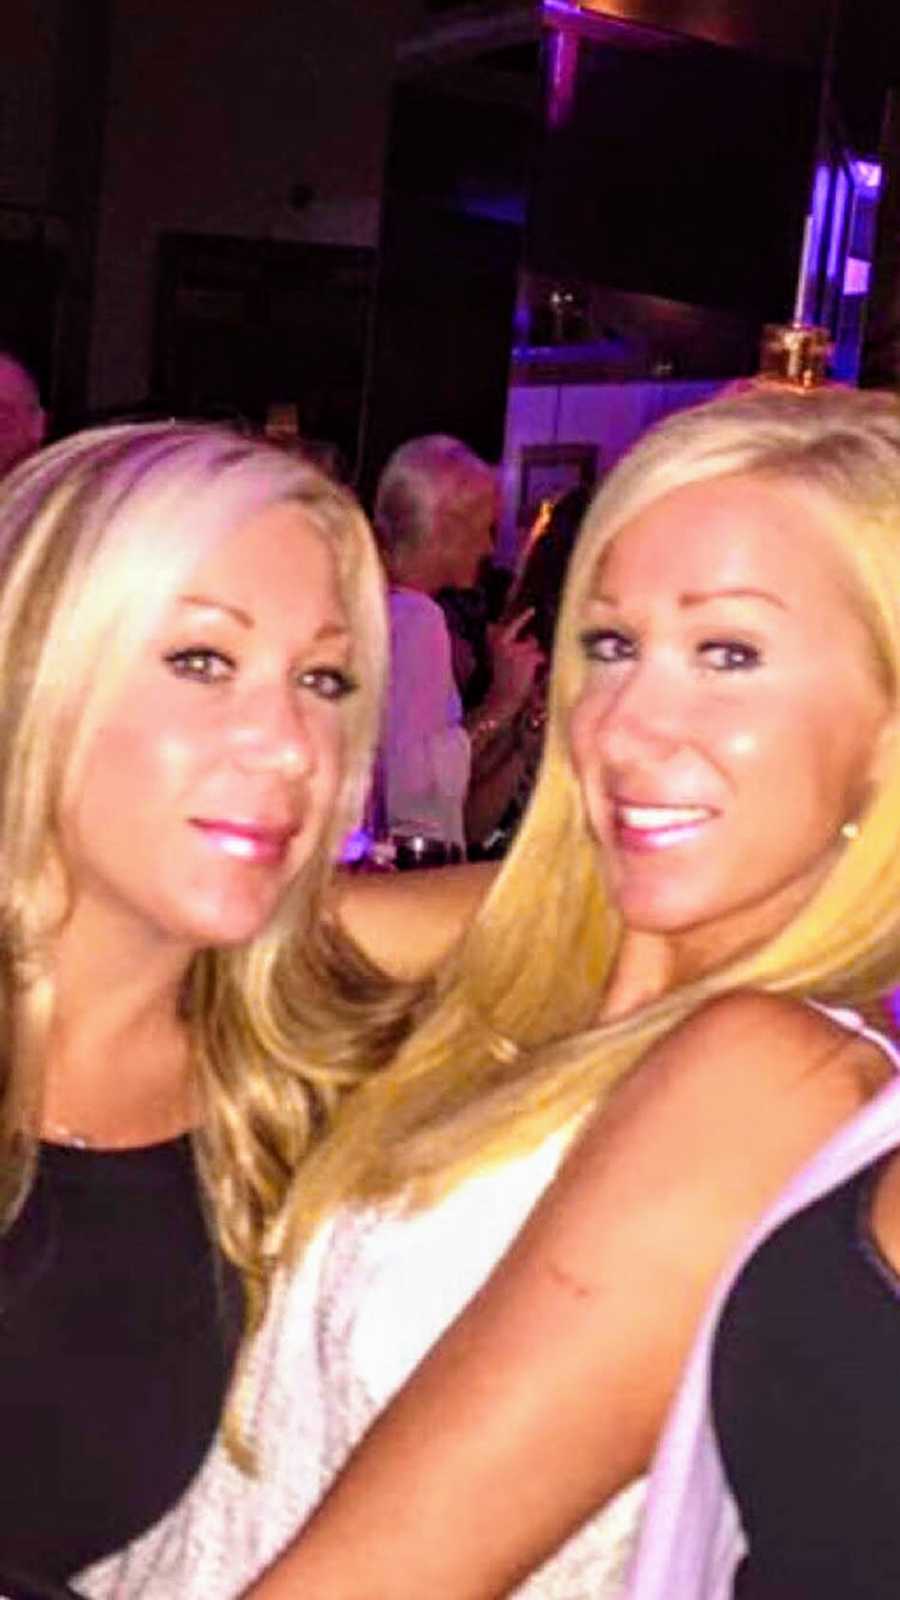 Twins stand smiling in club before one of them passed away